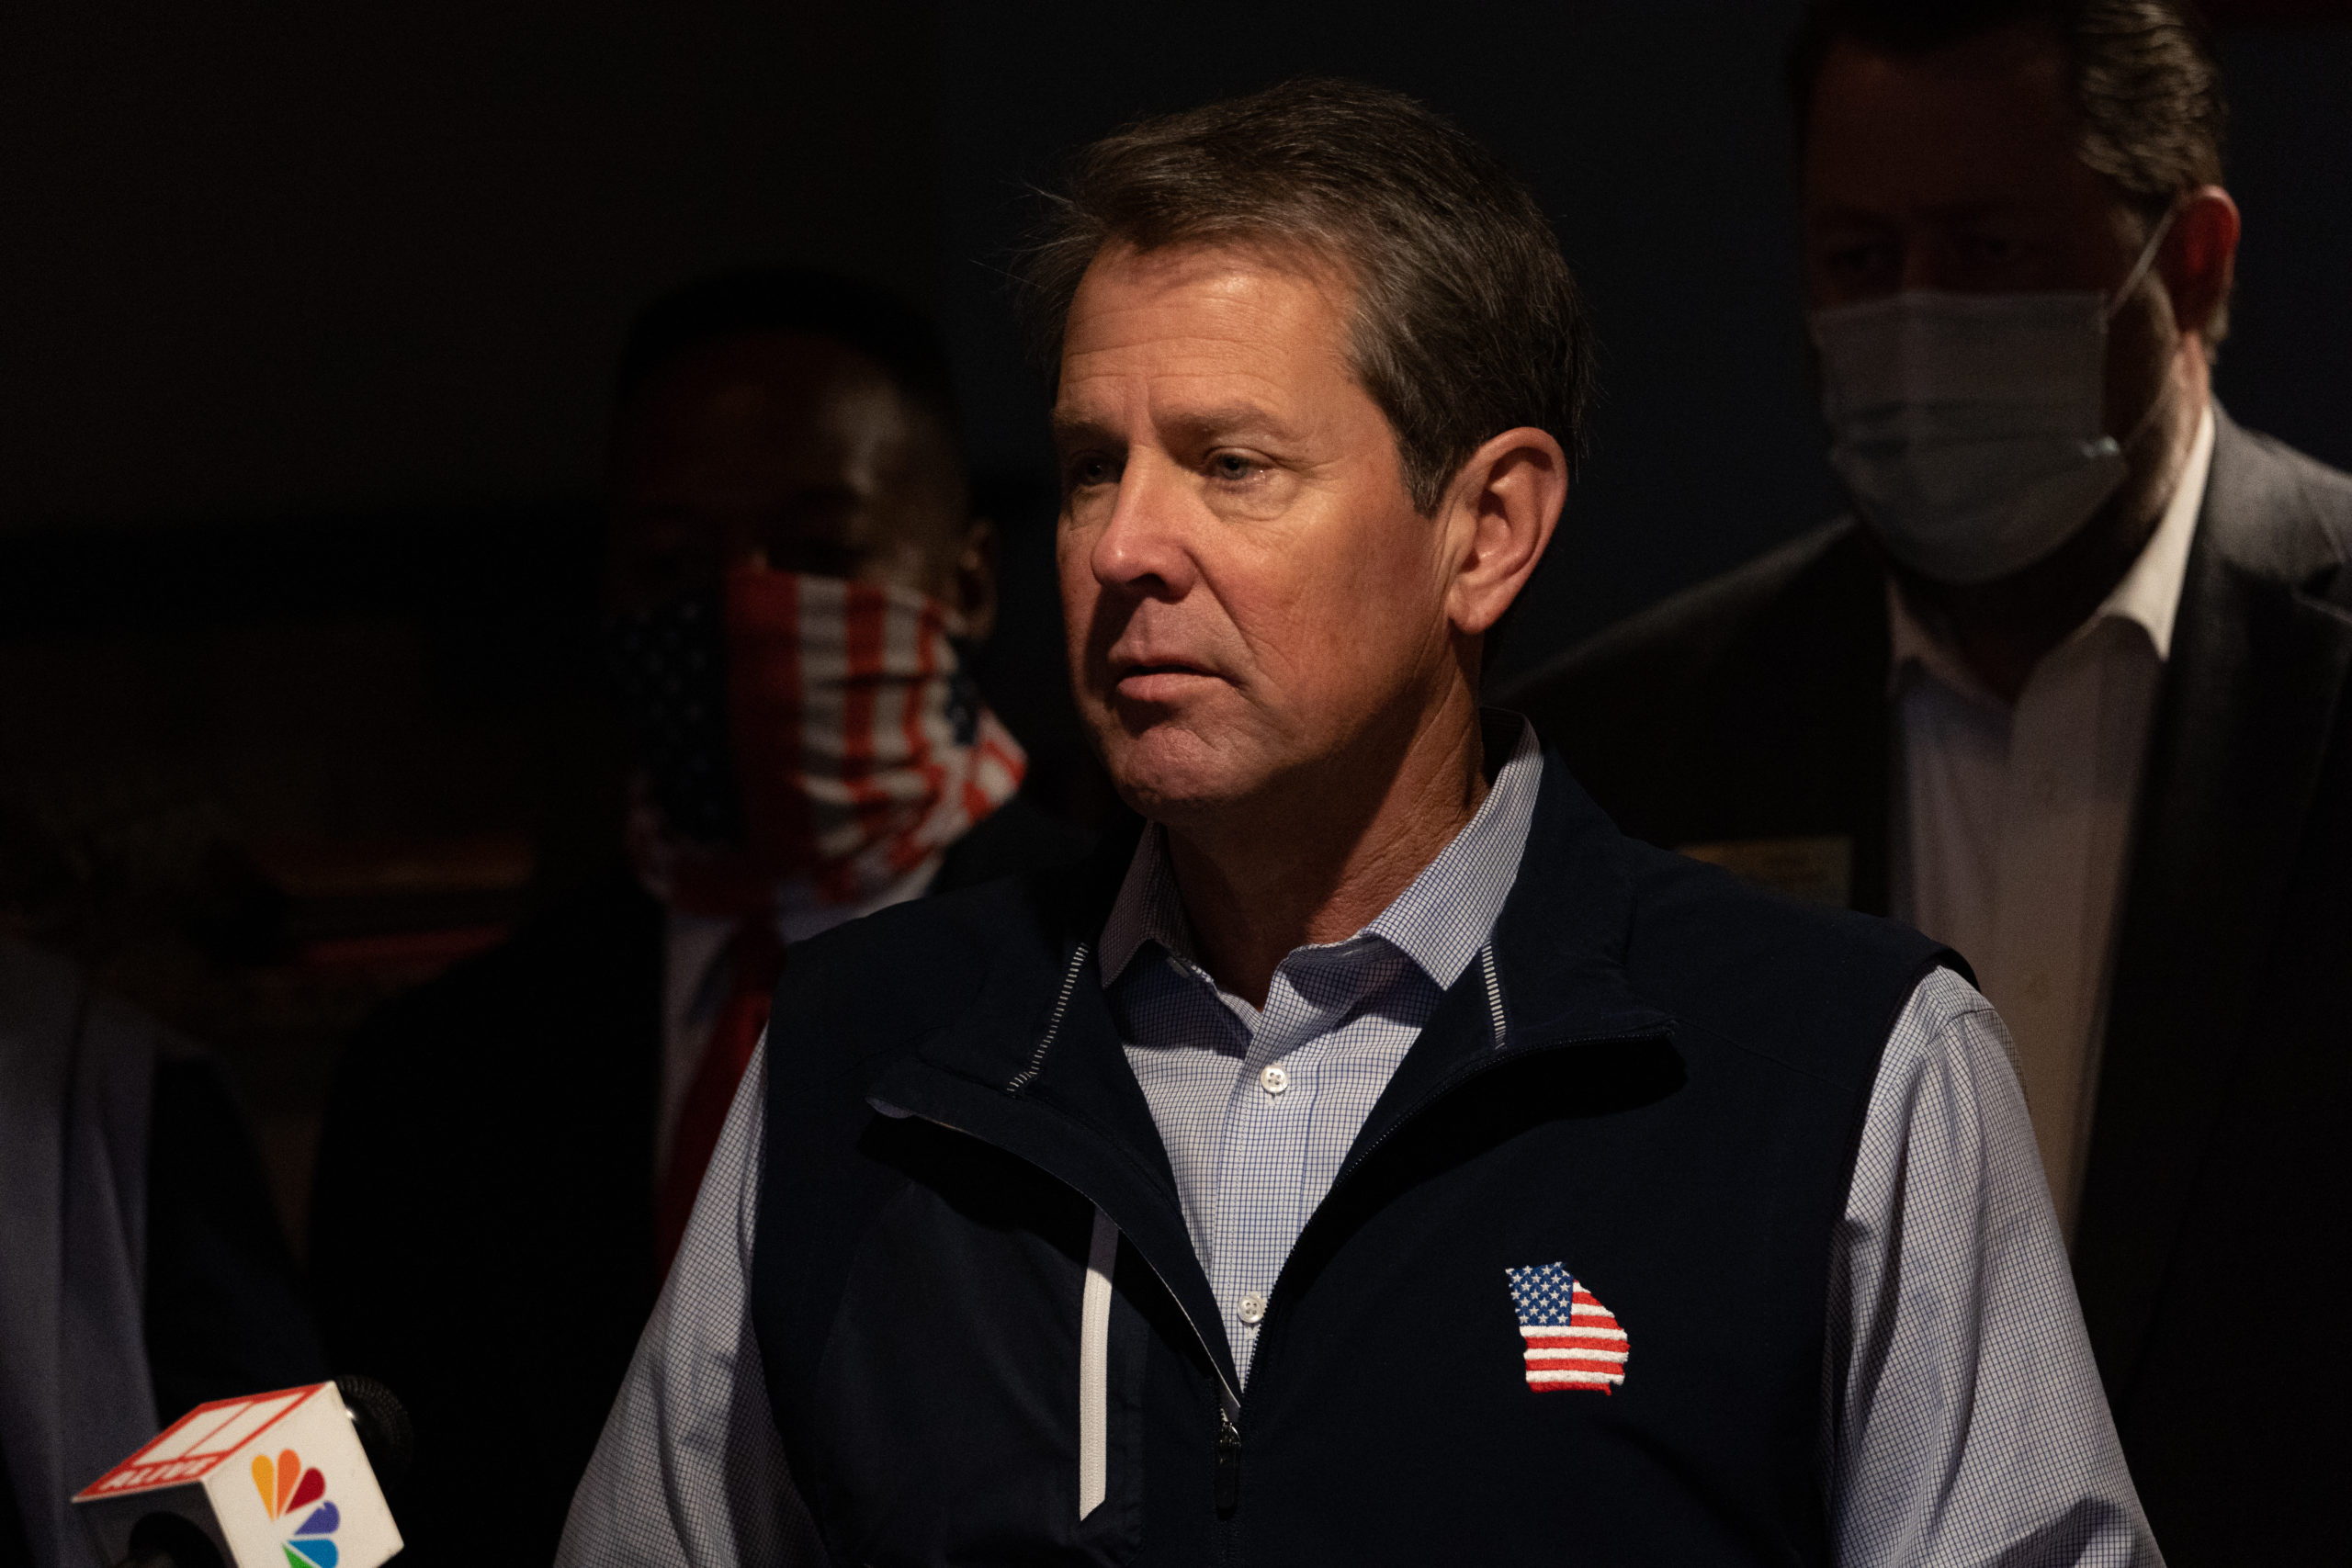 Georgia Gov. Brian Kemp speaks at a news conference about the state's new Election Integrity Law that passed this week at AJ’s Famous Seafood and Poboys on April 10, 2021 in Marietta, Georgia. (Megan Varner/Getty Images)